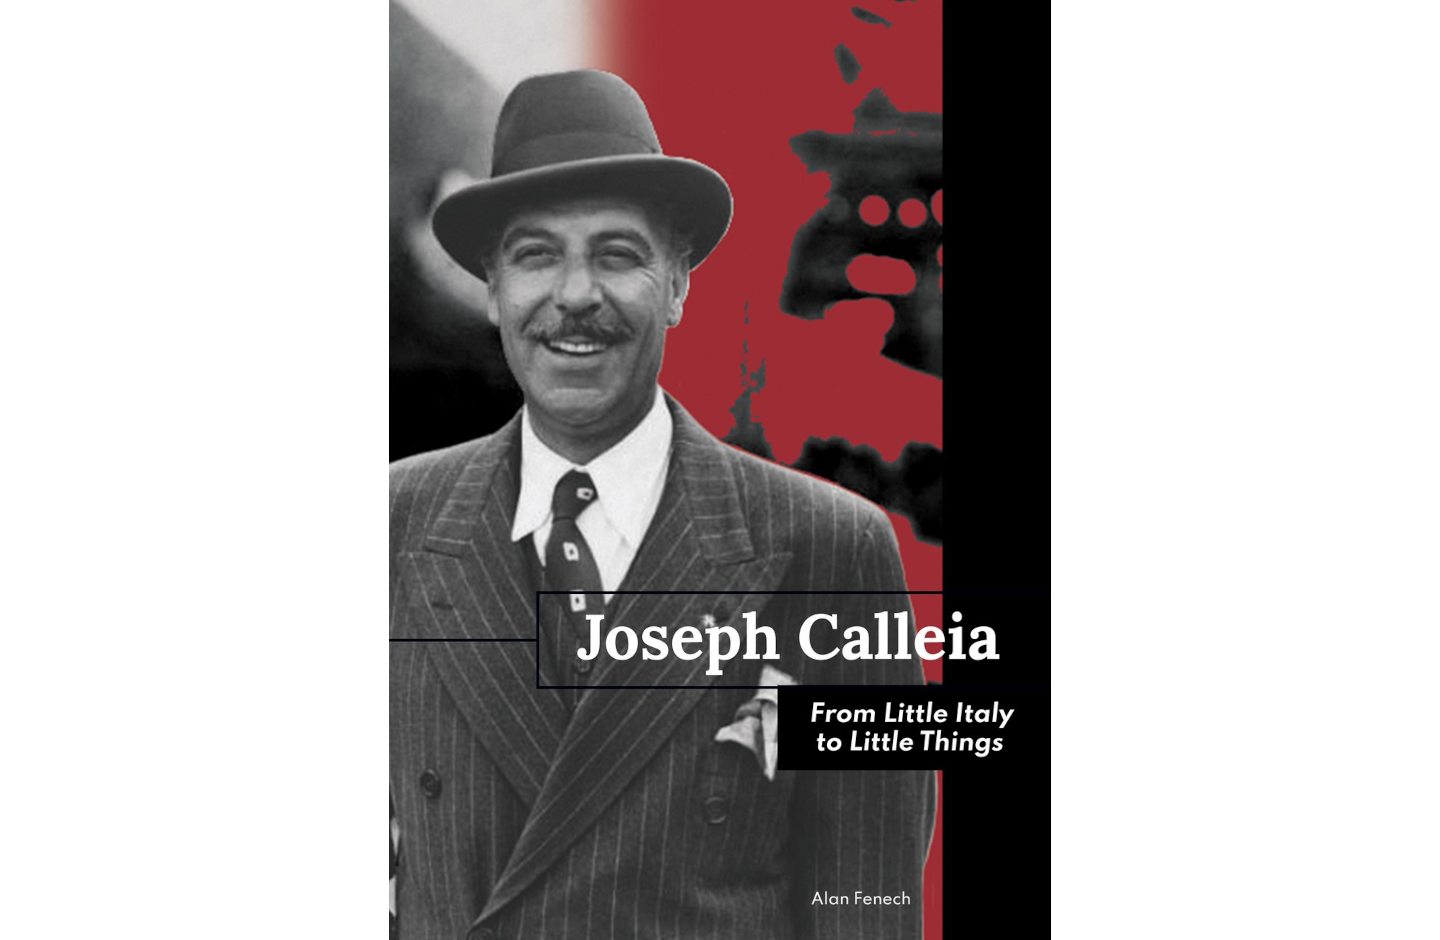 Joseph Calleia: From Little Italy to Little Things